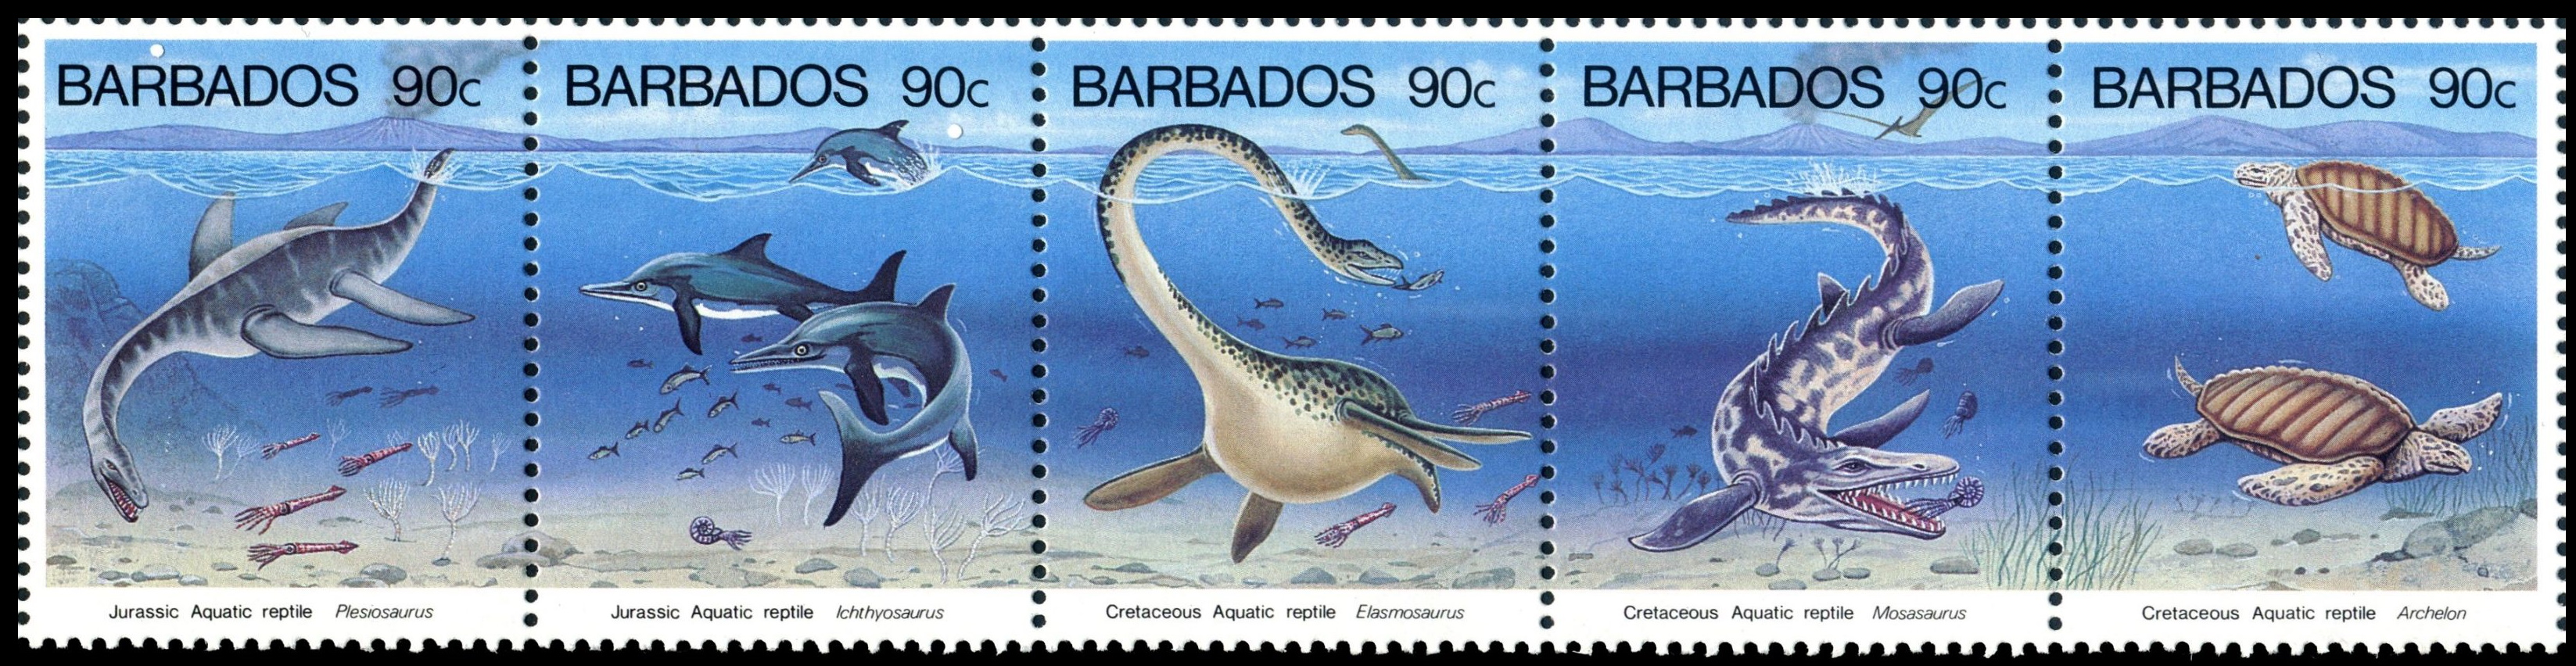 Prehistoric marine animals on stamps and a postmark of Barbados